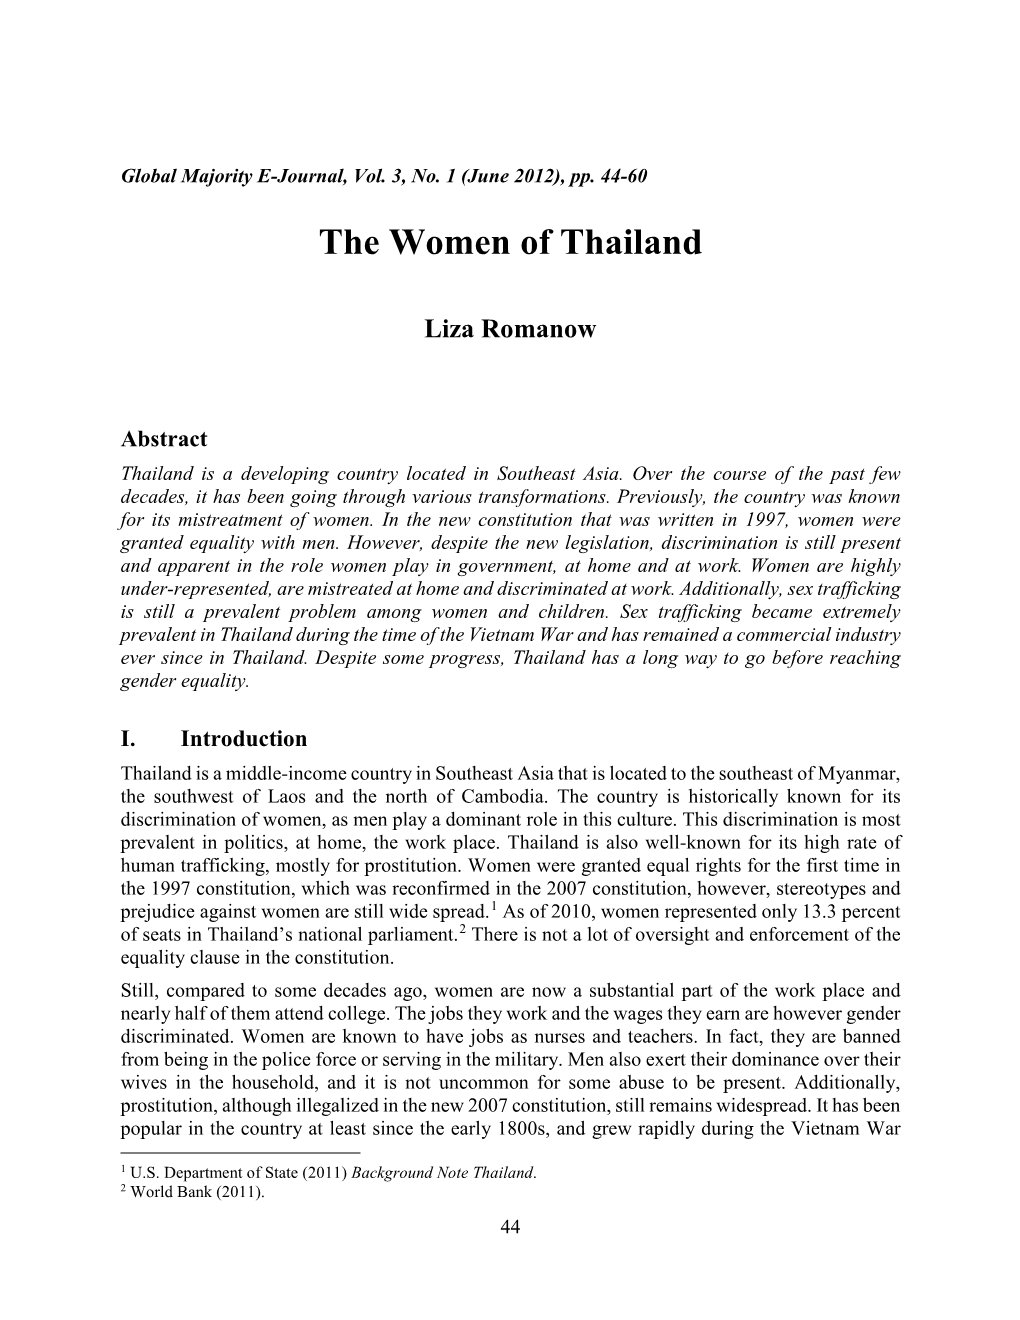 The Women of Thailand